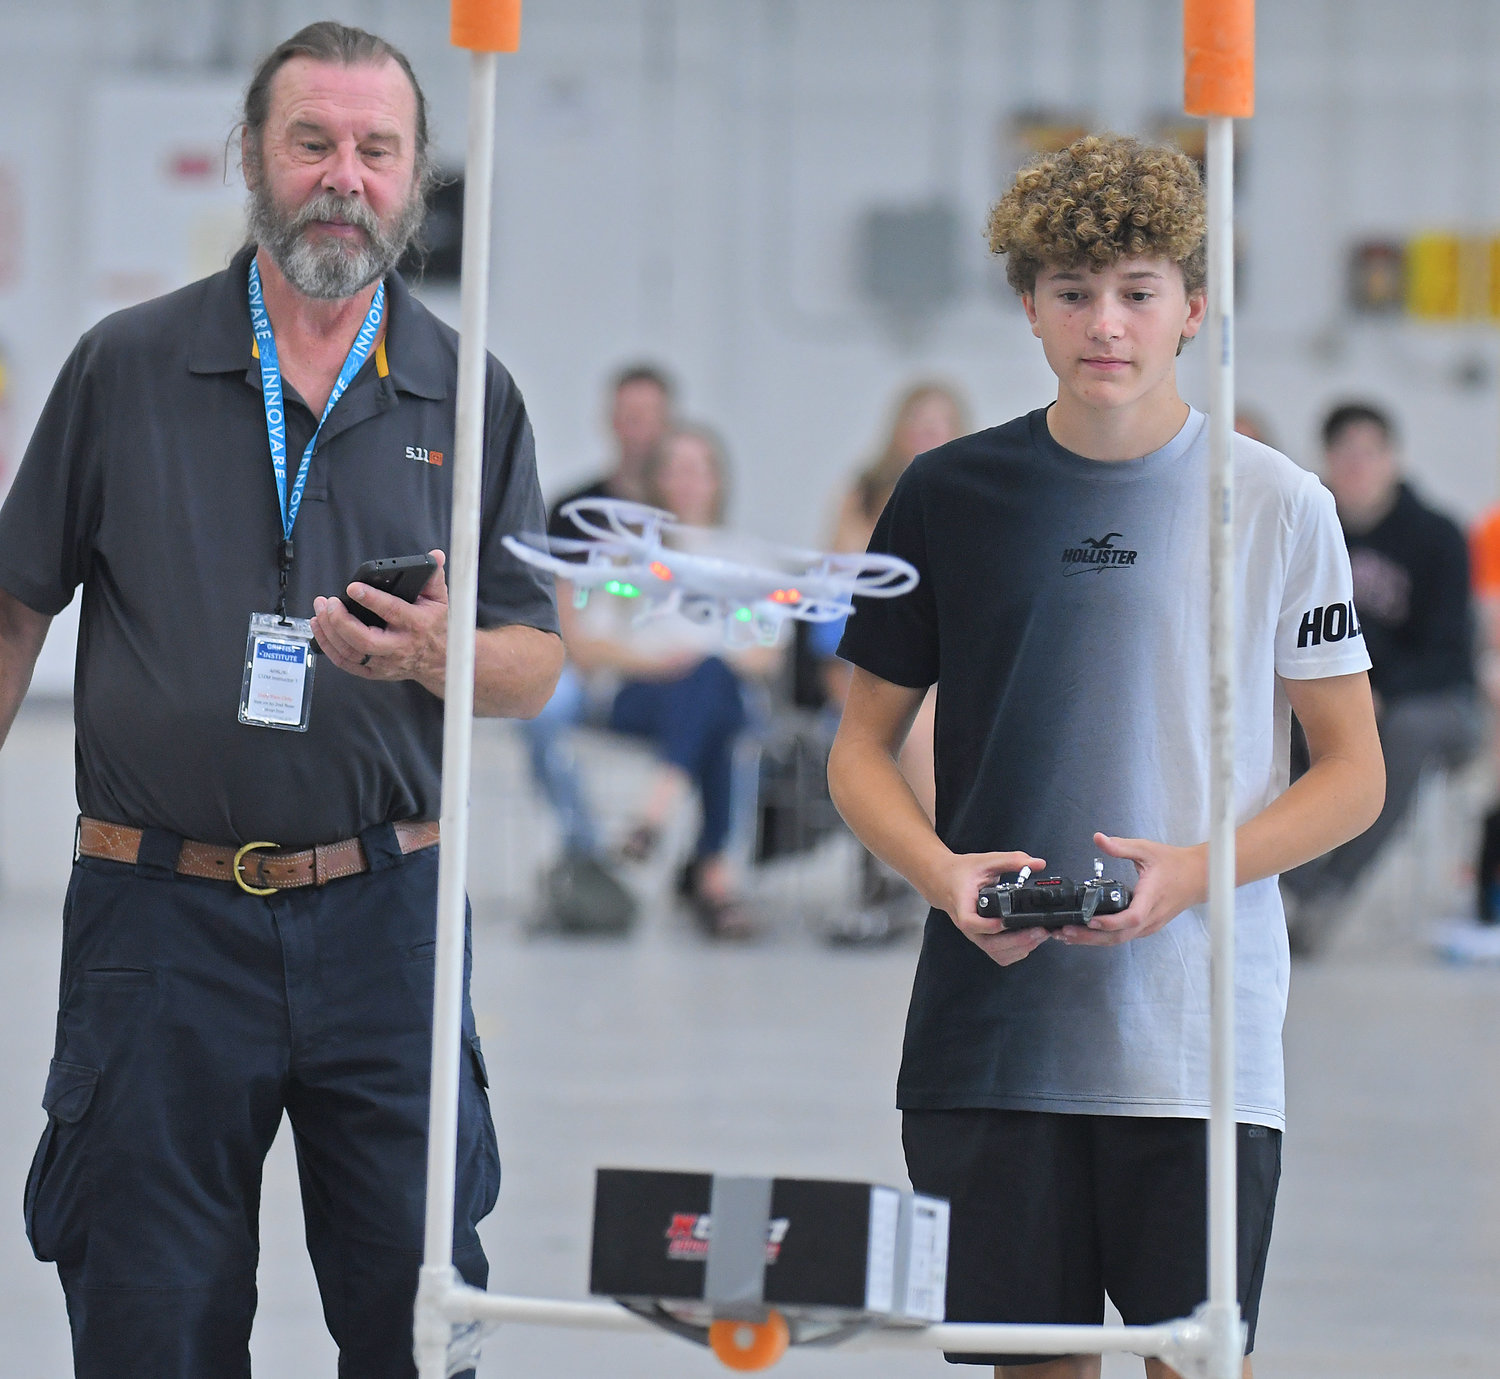 THROUGH THE POSTS — Rome Free Academy sophomore Joey Fiorini navigates his drone to one of the obstacles as drone camp instructor Bill Judycki keeps the time during the Directorate STEM Outreach Program’s Drone Camp in the hangar at Innovare Advancement Center on Friday, Aug. 5, 2022.